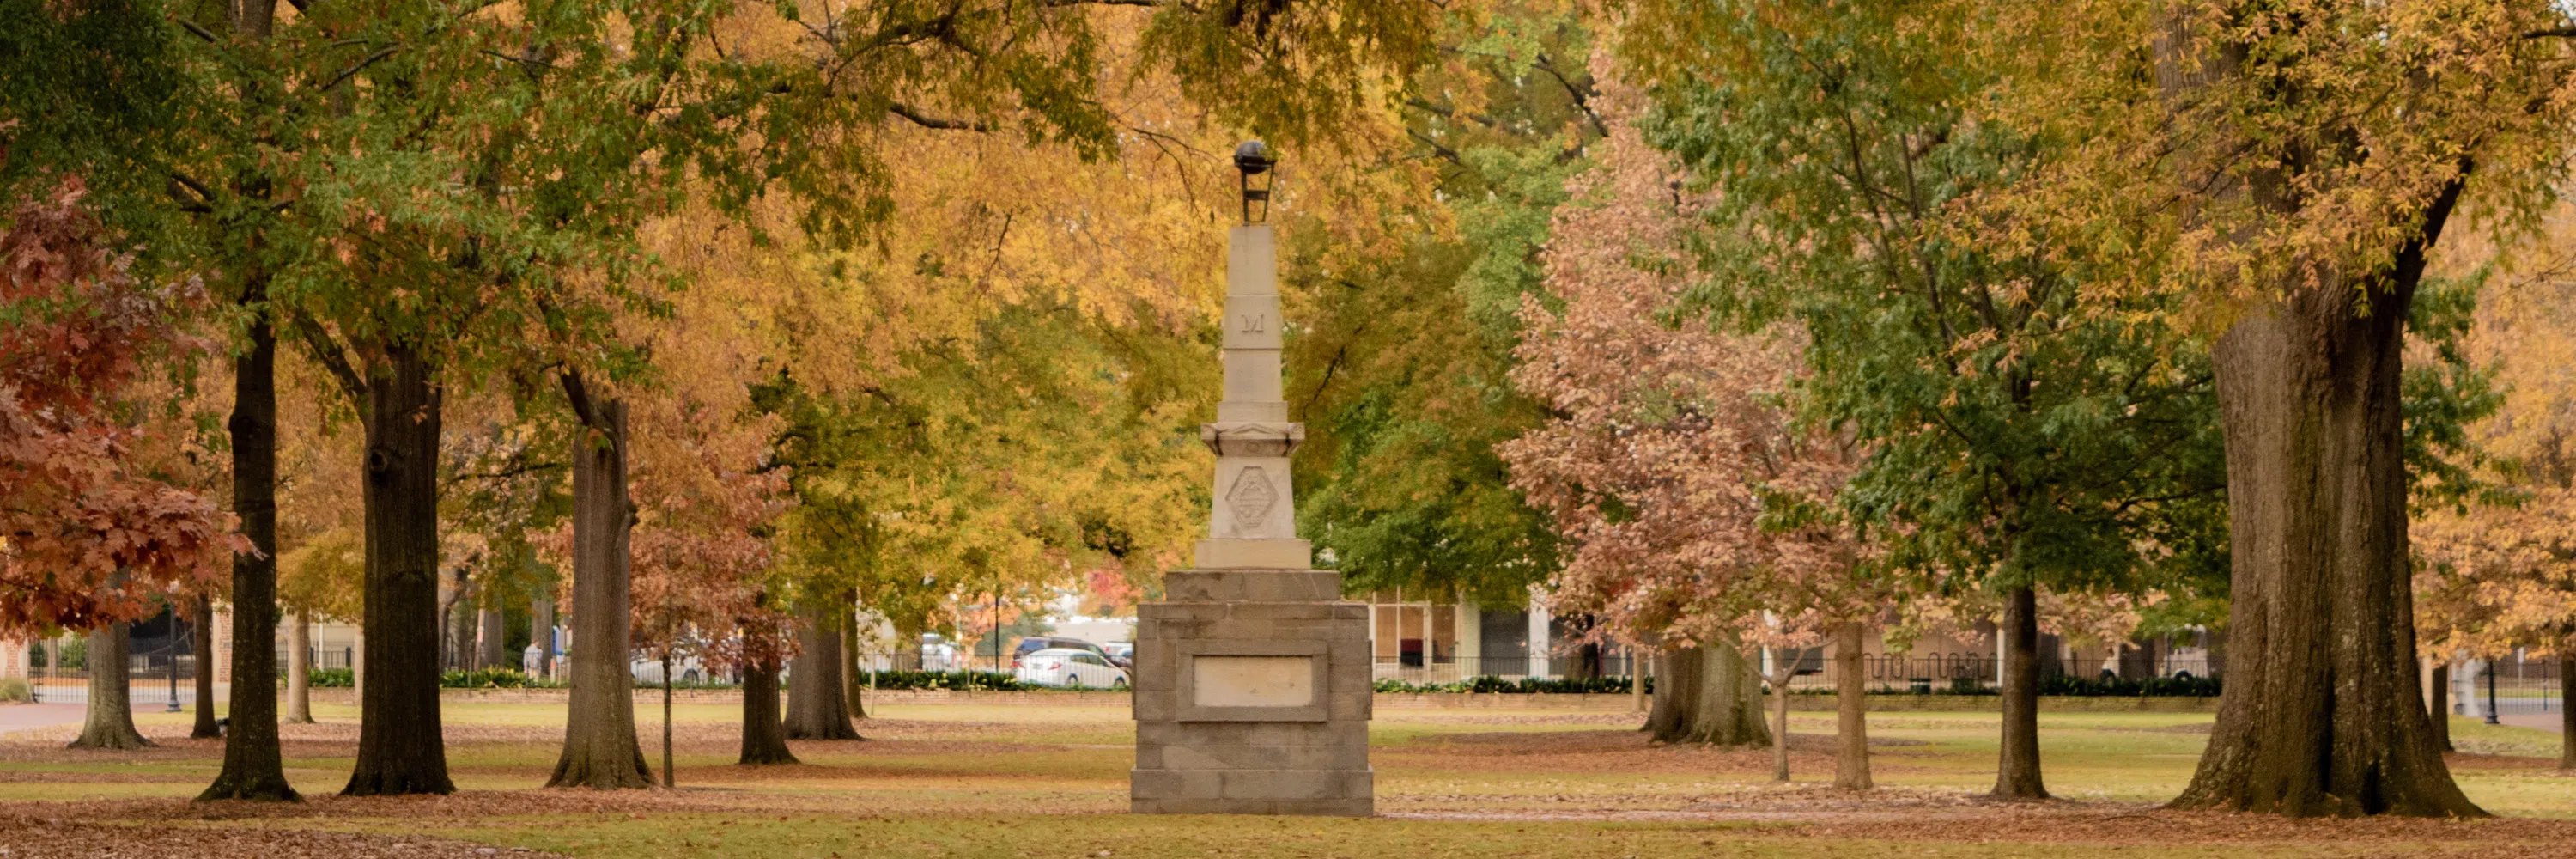 View of the Maxcy Monument during a fall day